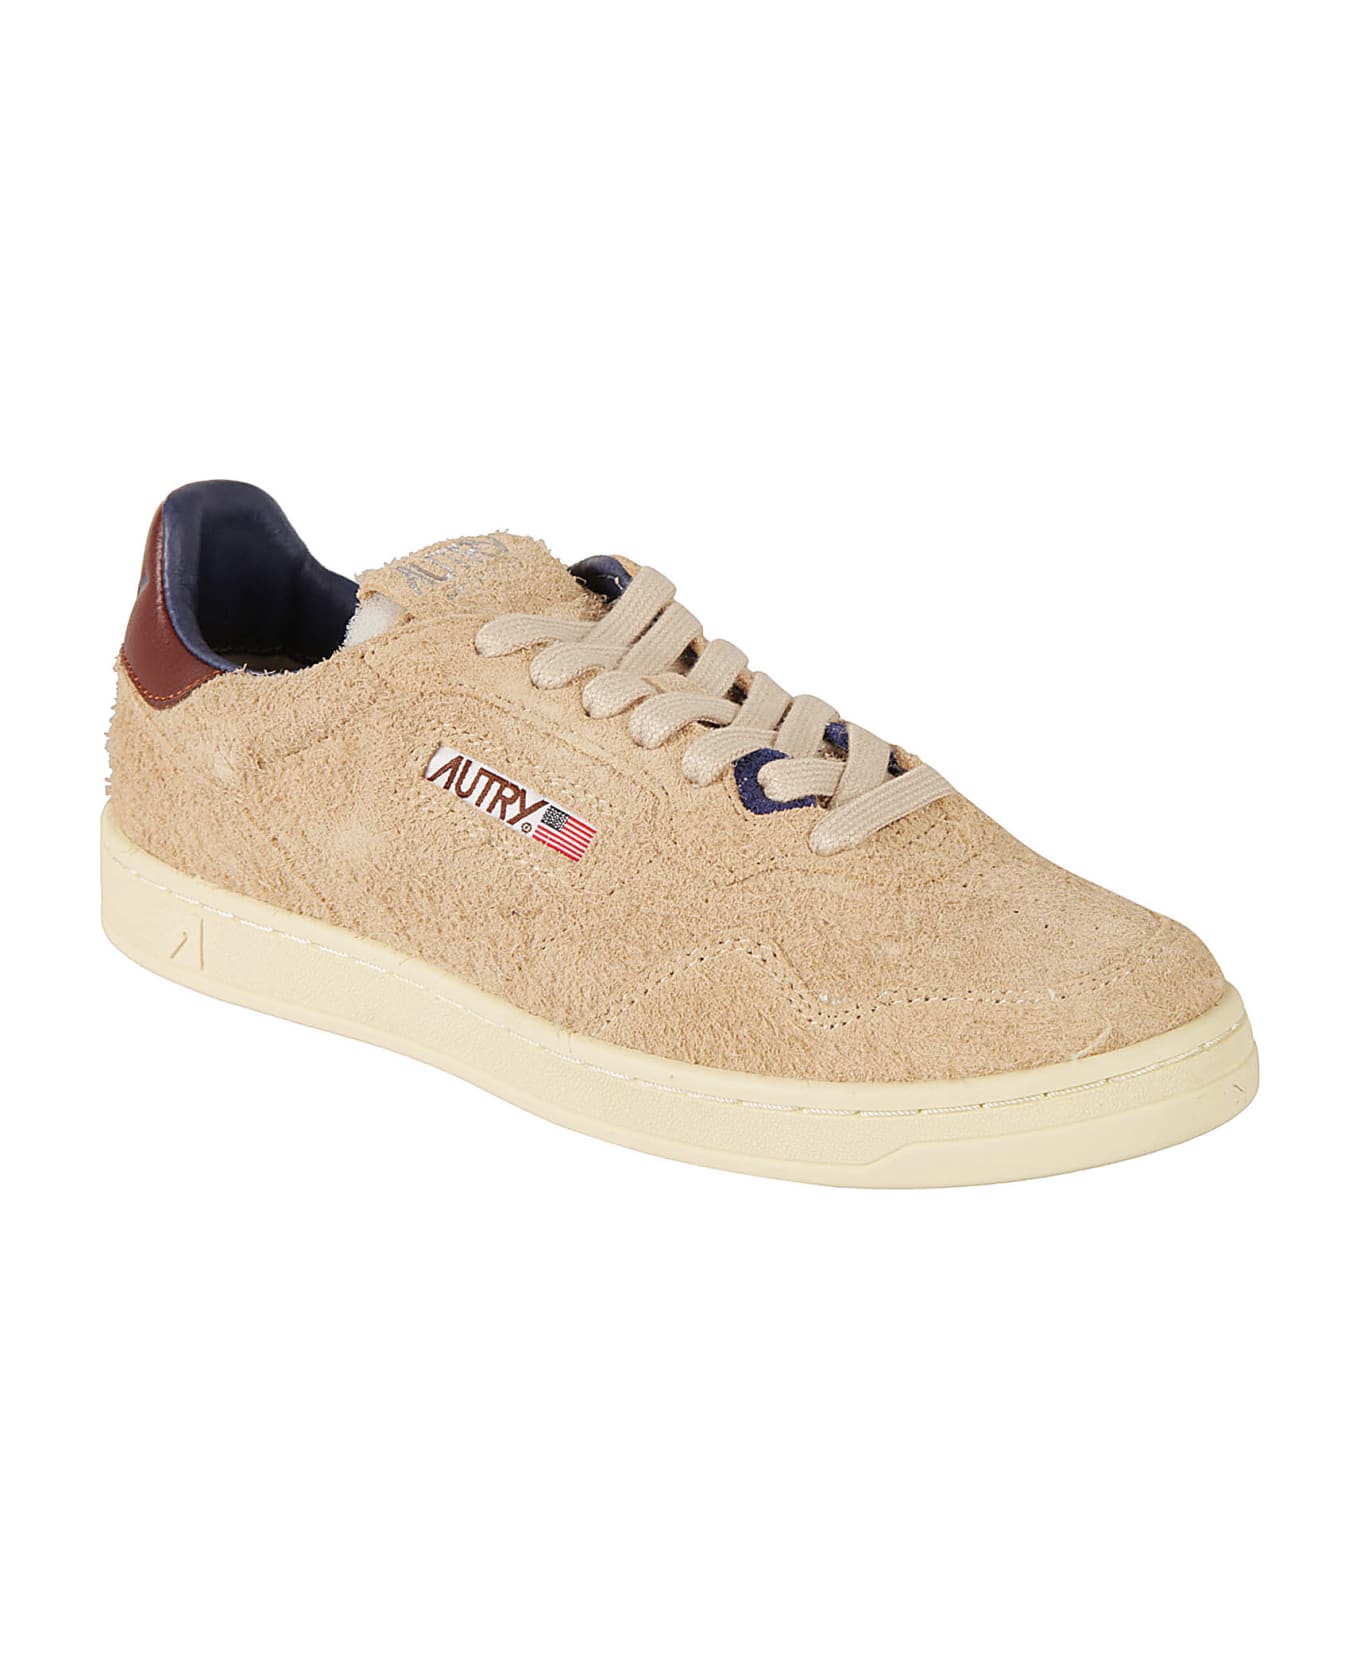 Autry Logo Patched Low Sneakers - Ecru/Fudge